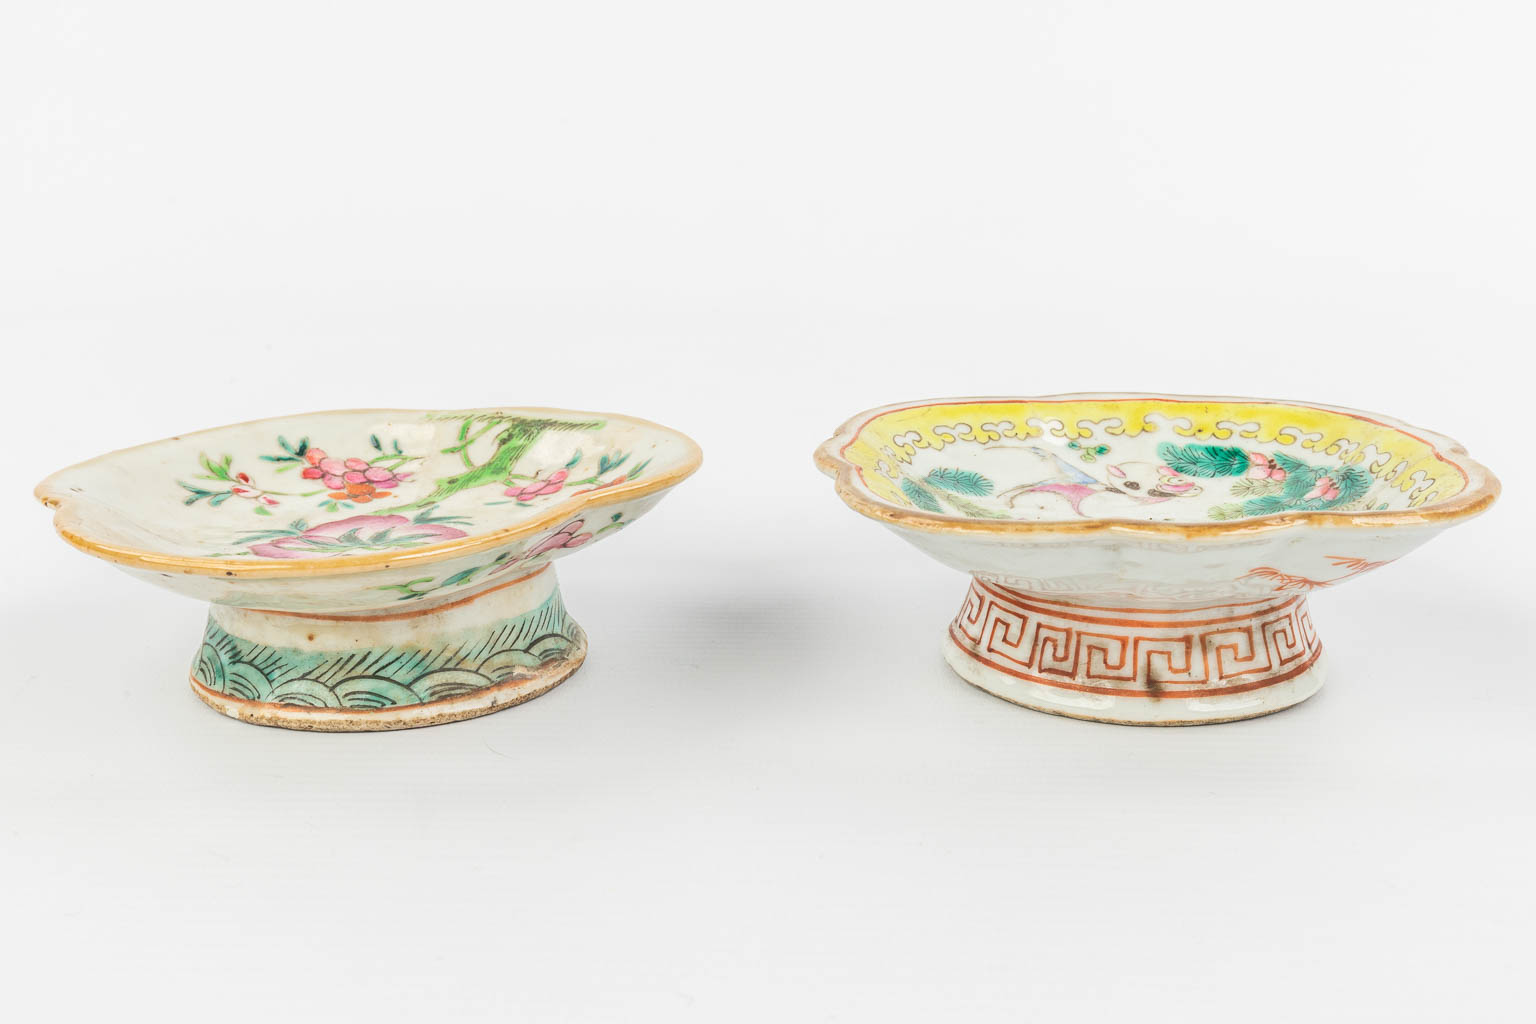 A collection of 2 Oriental bowls with images of peaches and fish. 19th century. (H:3,5cm) - Image 9 of 13